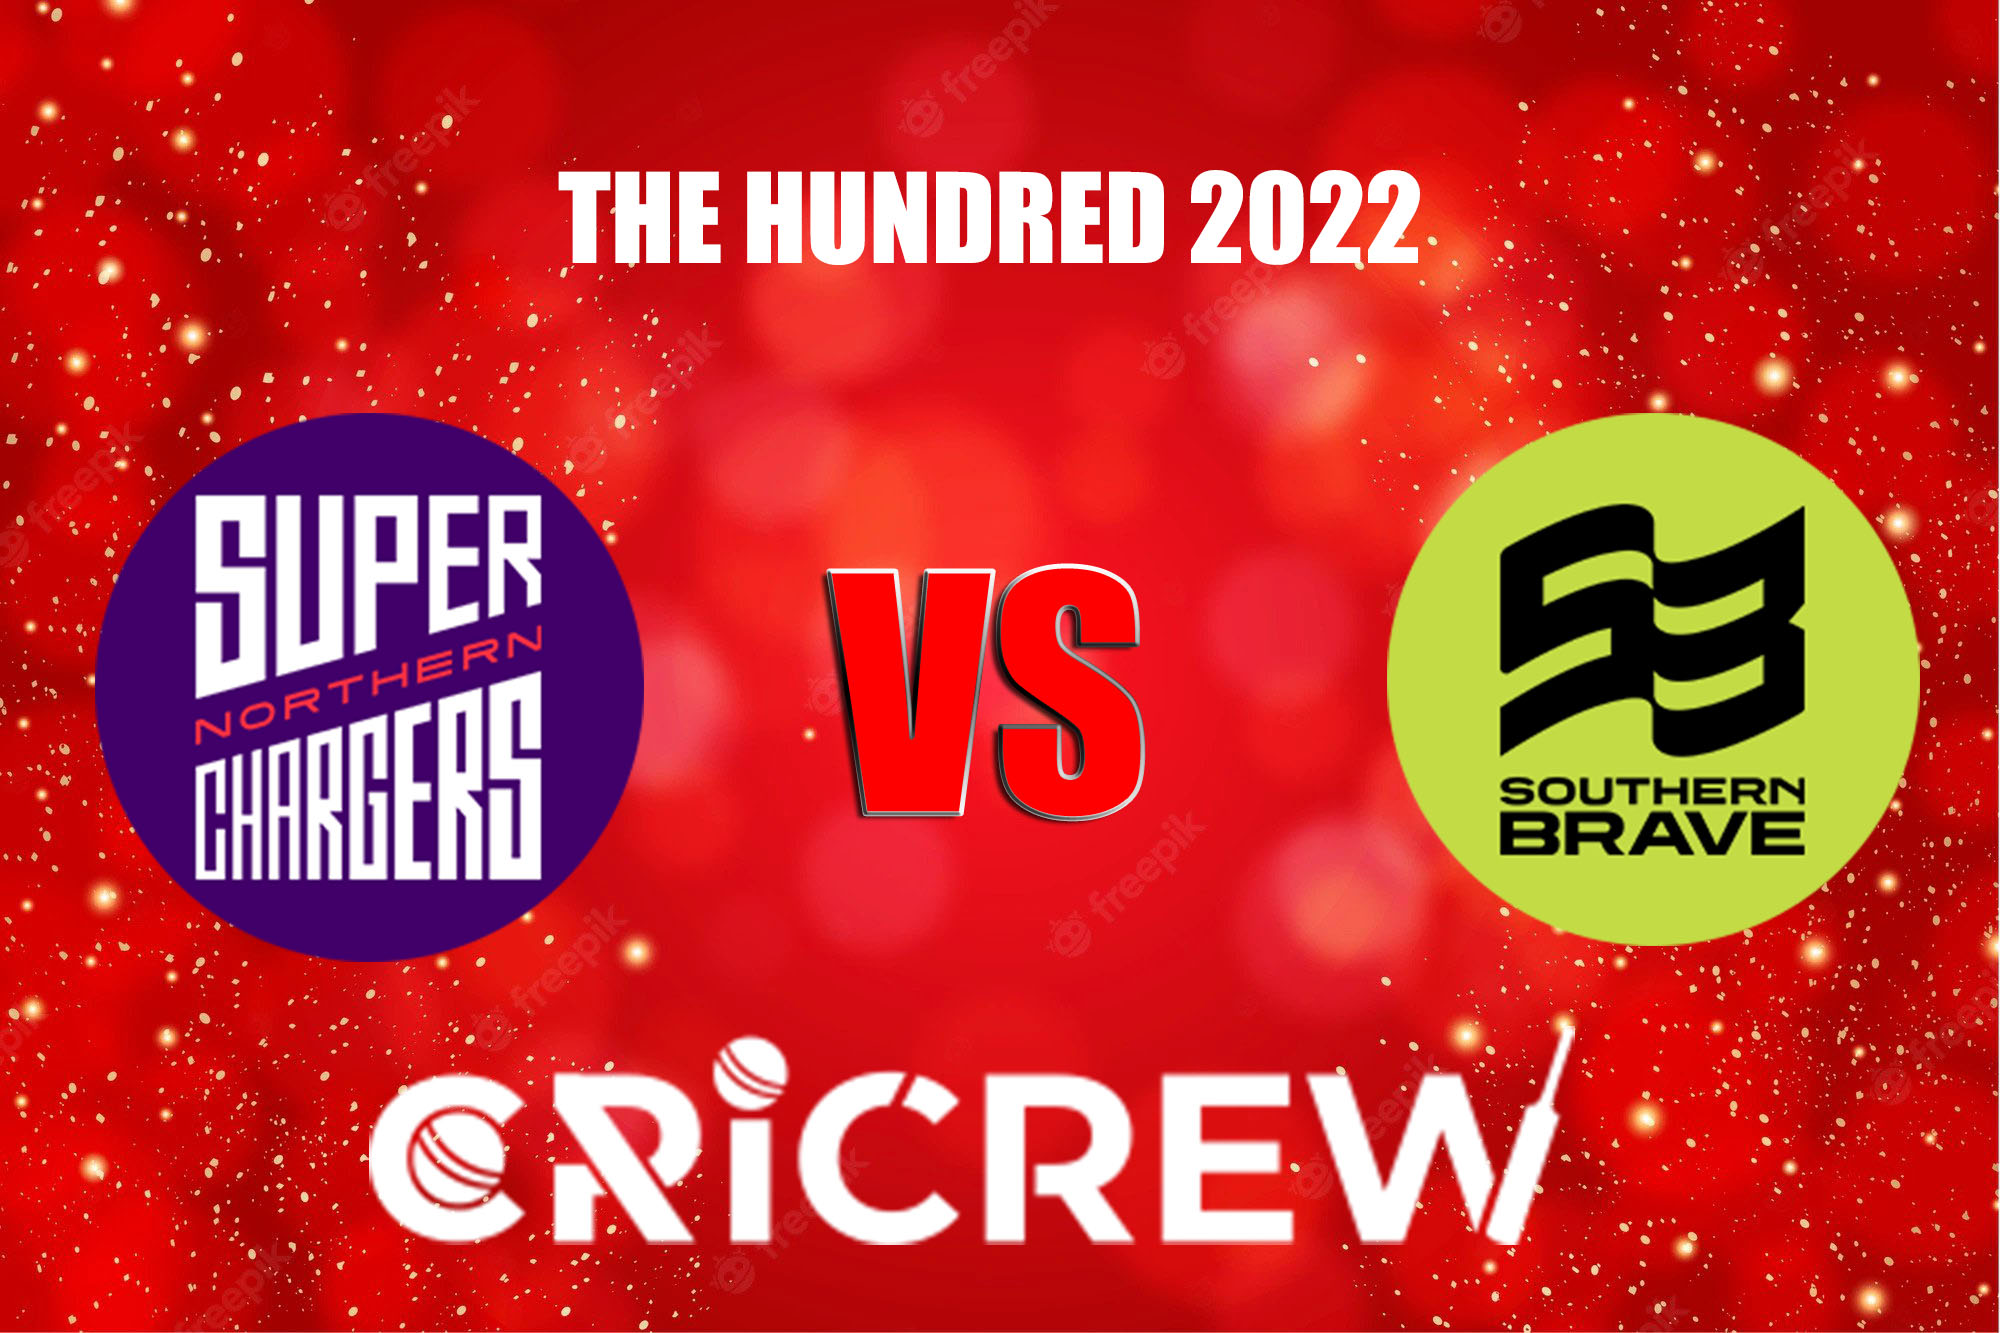 NOS vs SOB Live Score starts on 25th August at 11:30 PM IST at The Headingley, Leeds. Here on www.cricrew.com you can find all Live, Upcoming and Recent Matches